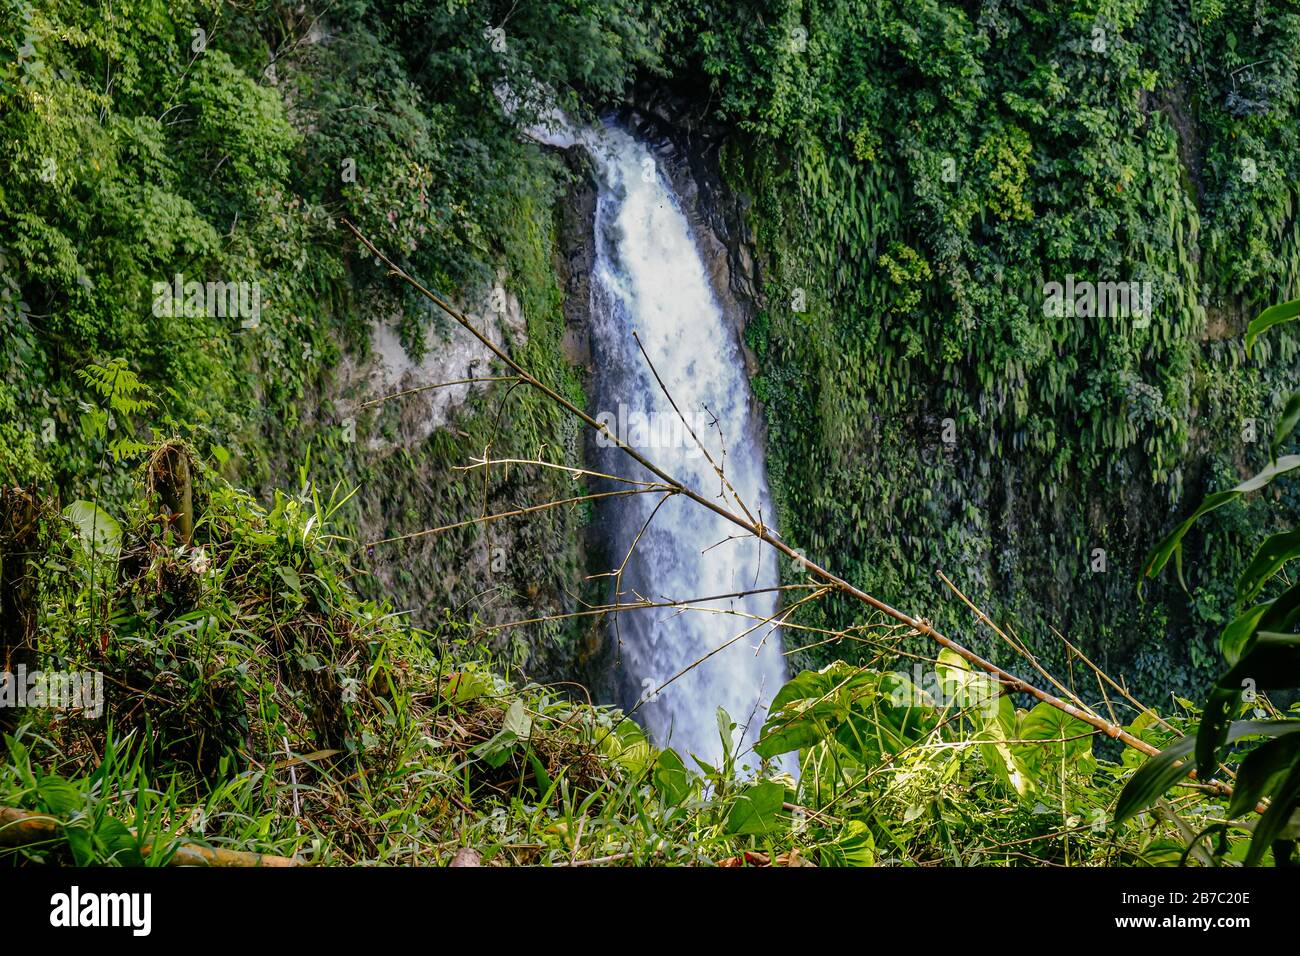 Hikong Bente falls in Lake Sebu, South Cotabato, Philippines. This is the highest of the seven waterfalls at 70 meters. Stock Photo